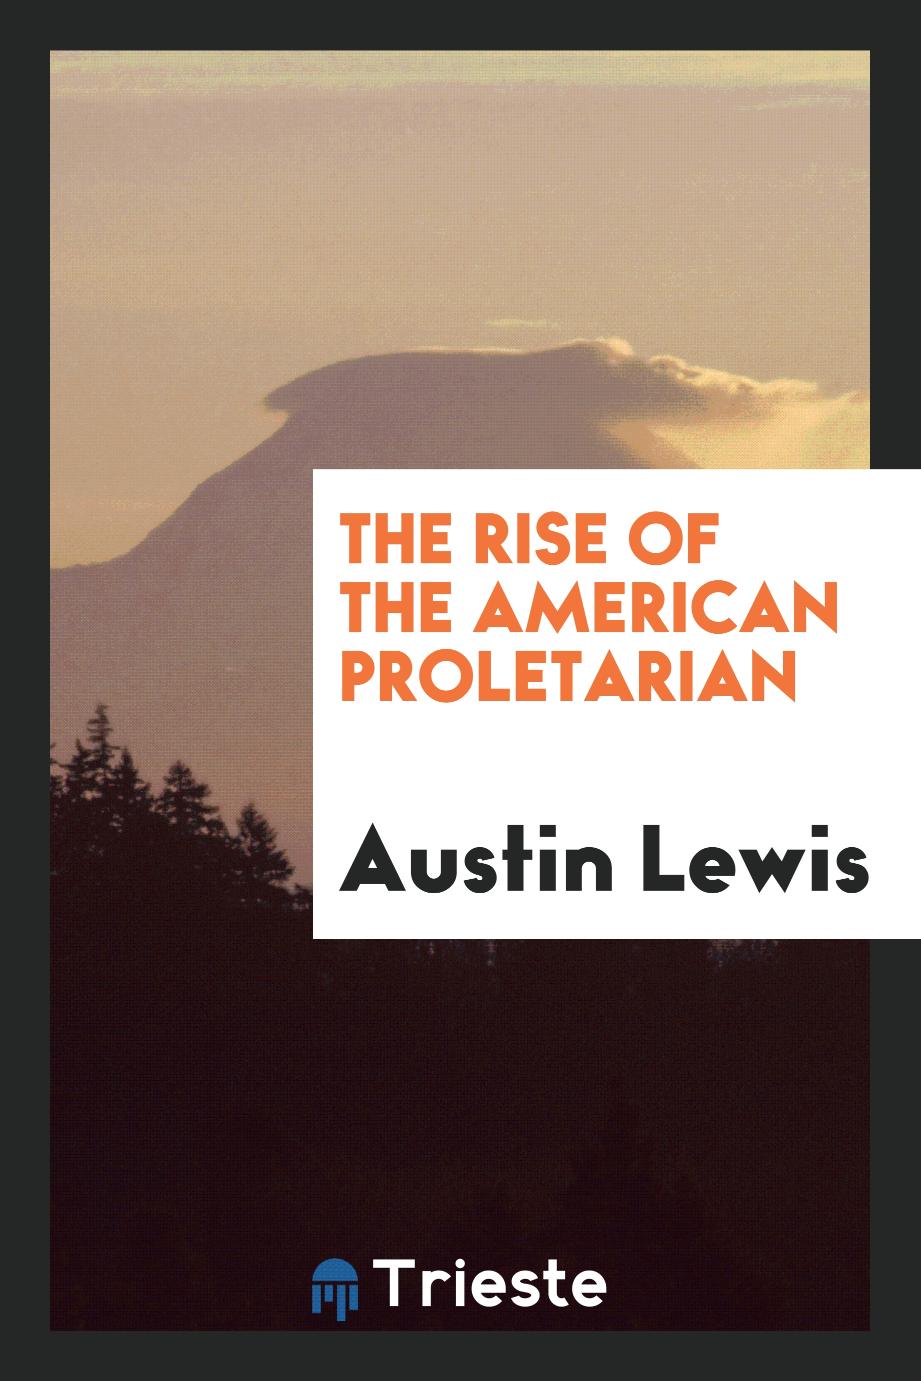 The rise of the American proletarian